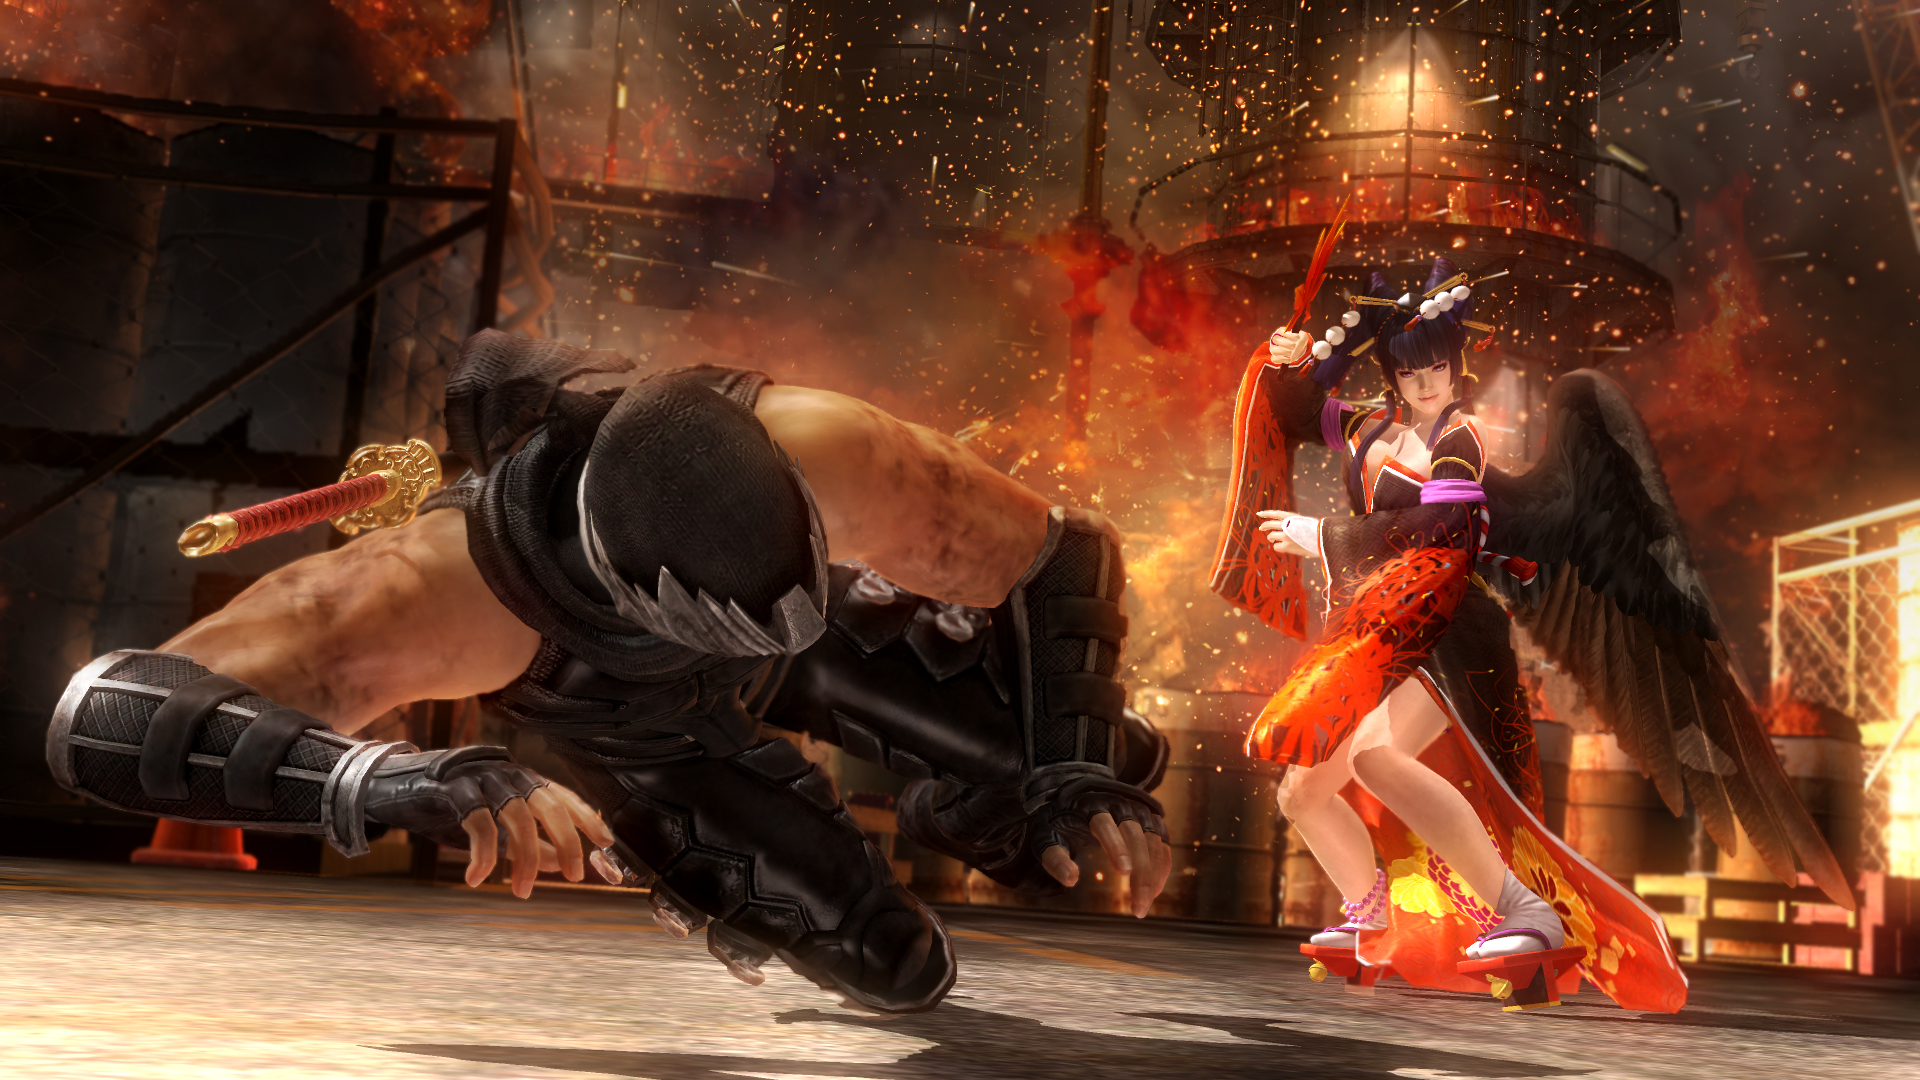 Игры дед 5. Игра Dead or Alive 5. Doa 5 last Round. Файтинги Dead or Alive 5. Dead for a Alive 5 last Round.